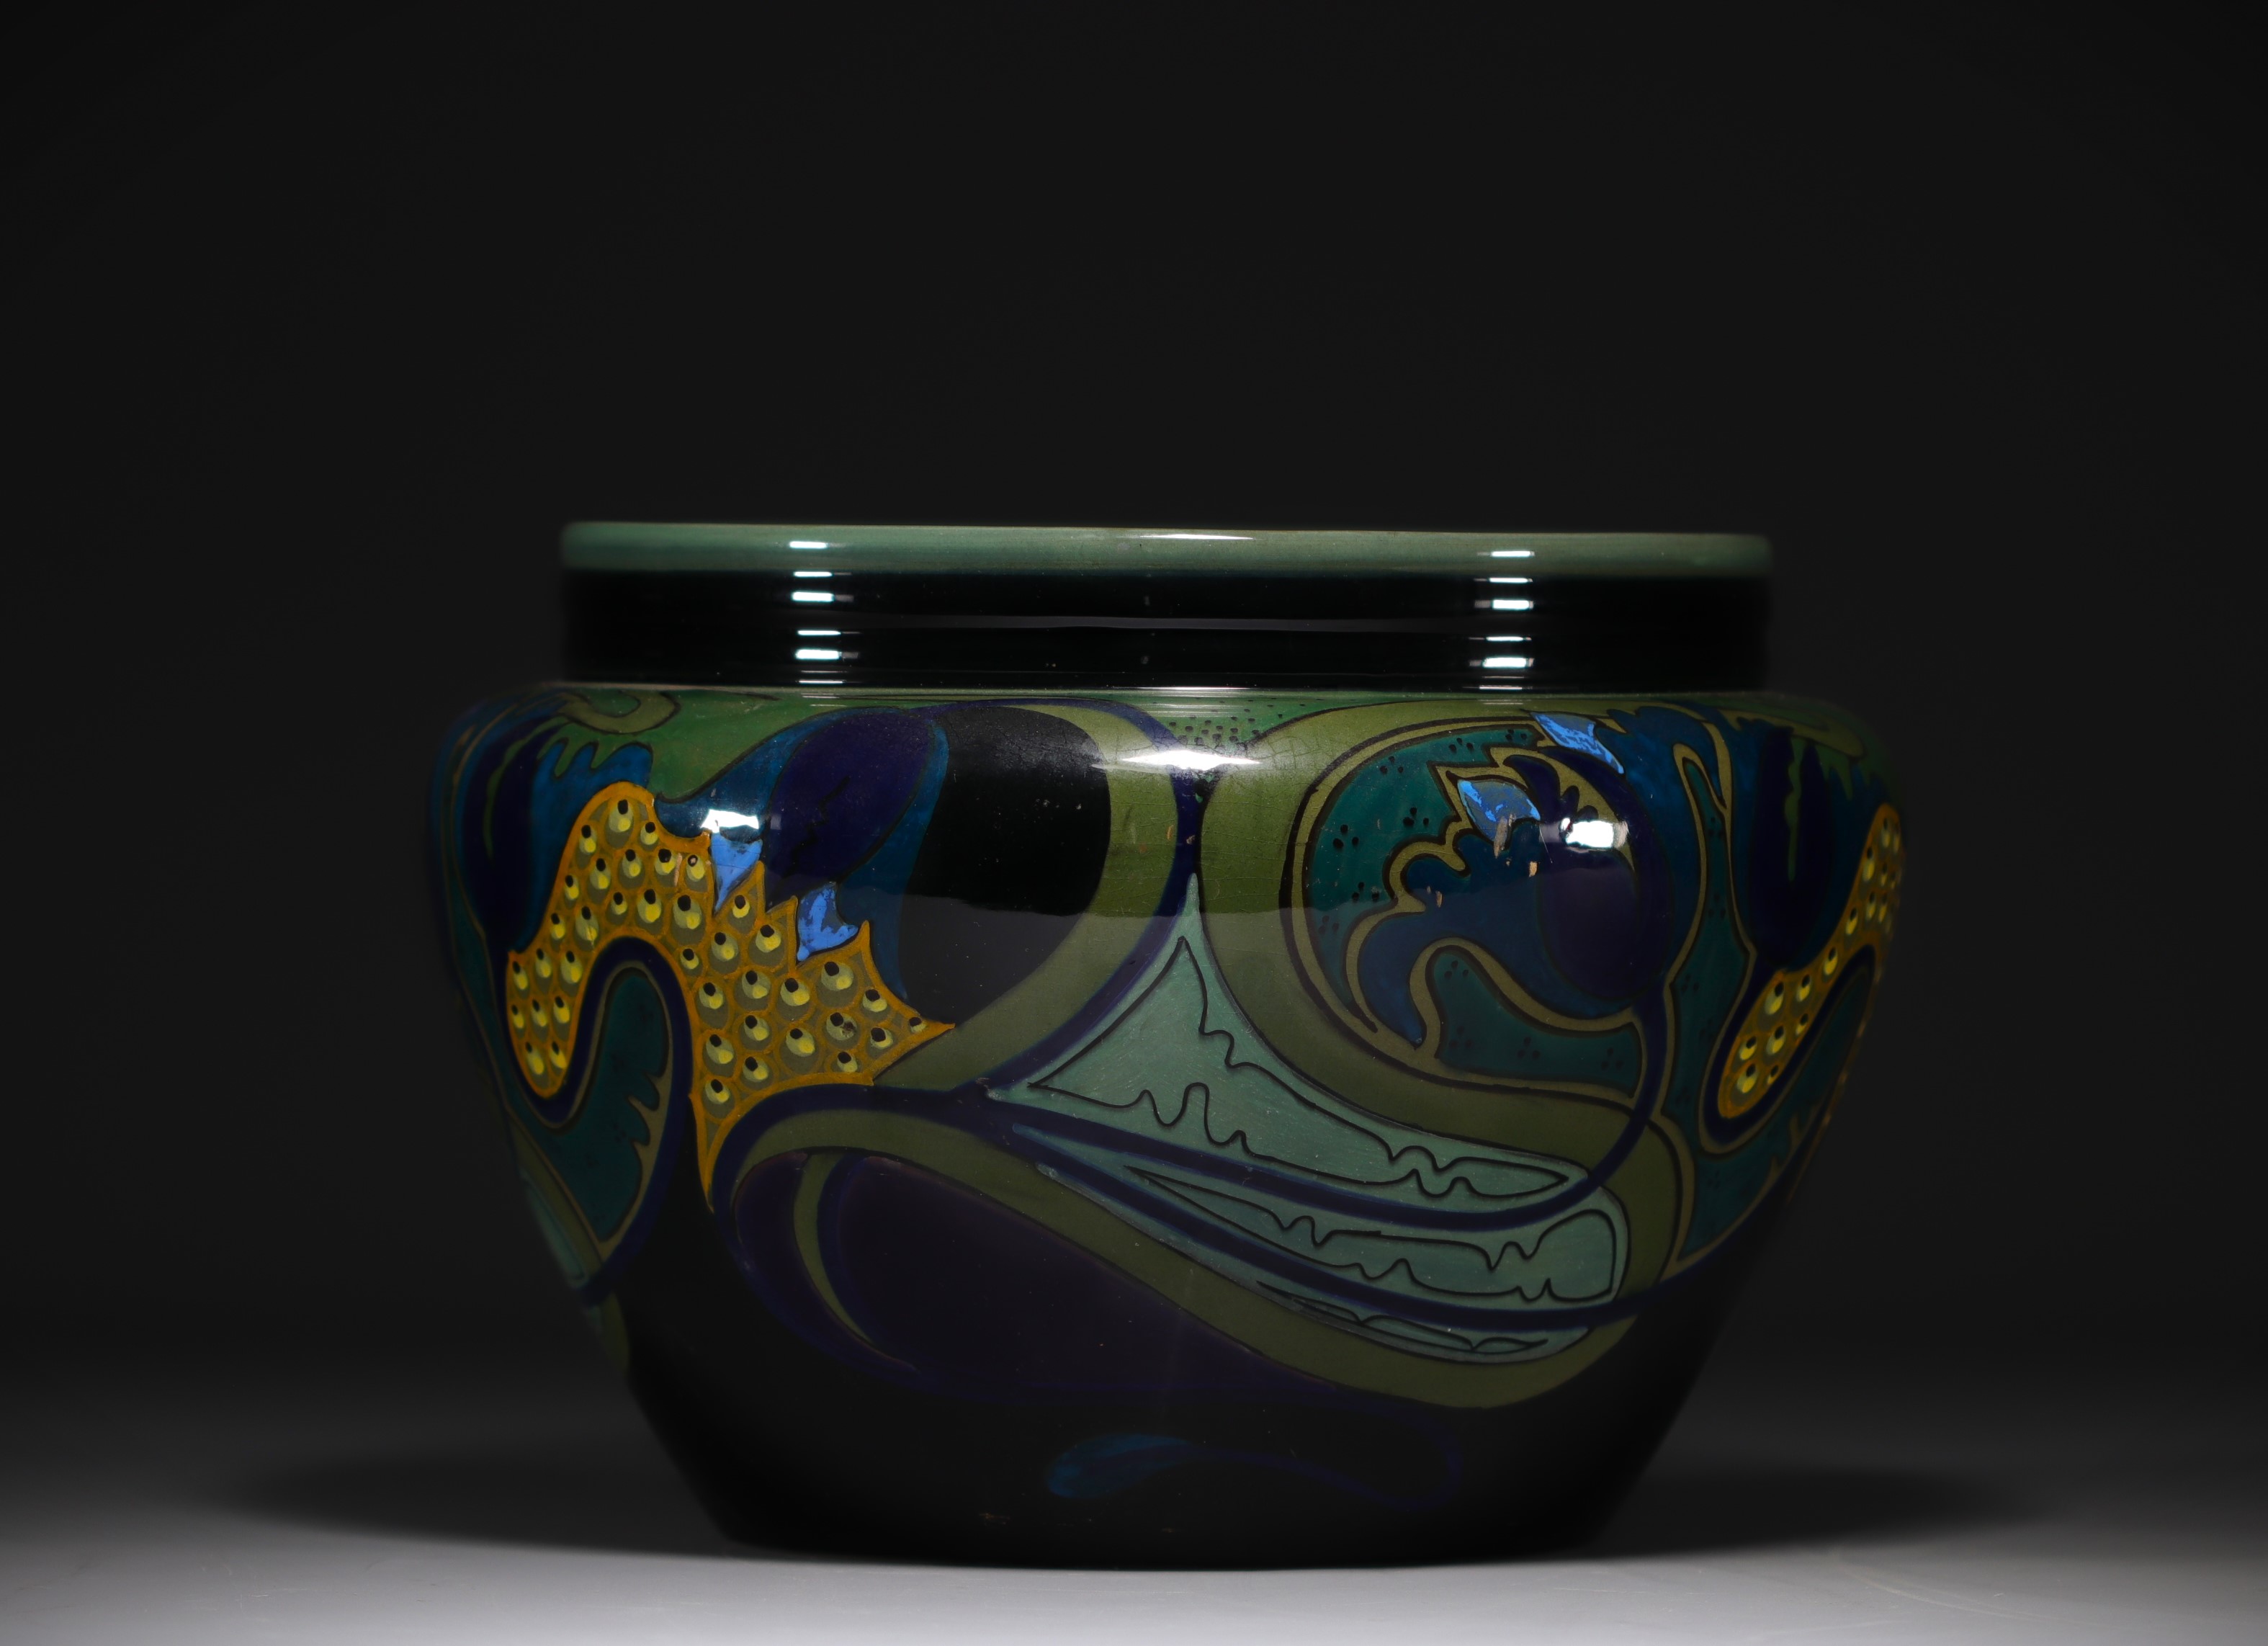 Art Nouveau ceramic vase or bowl from the Gouda factory in the Netherlands. - Image 2 of 6